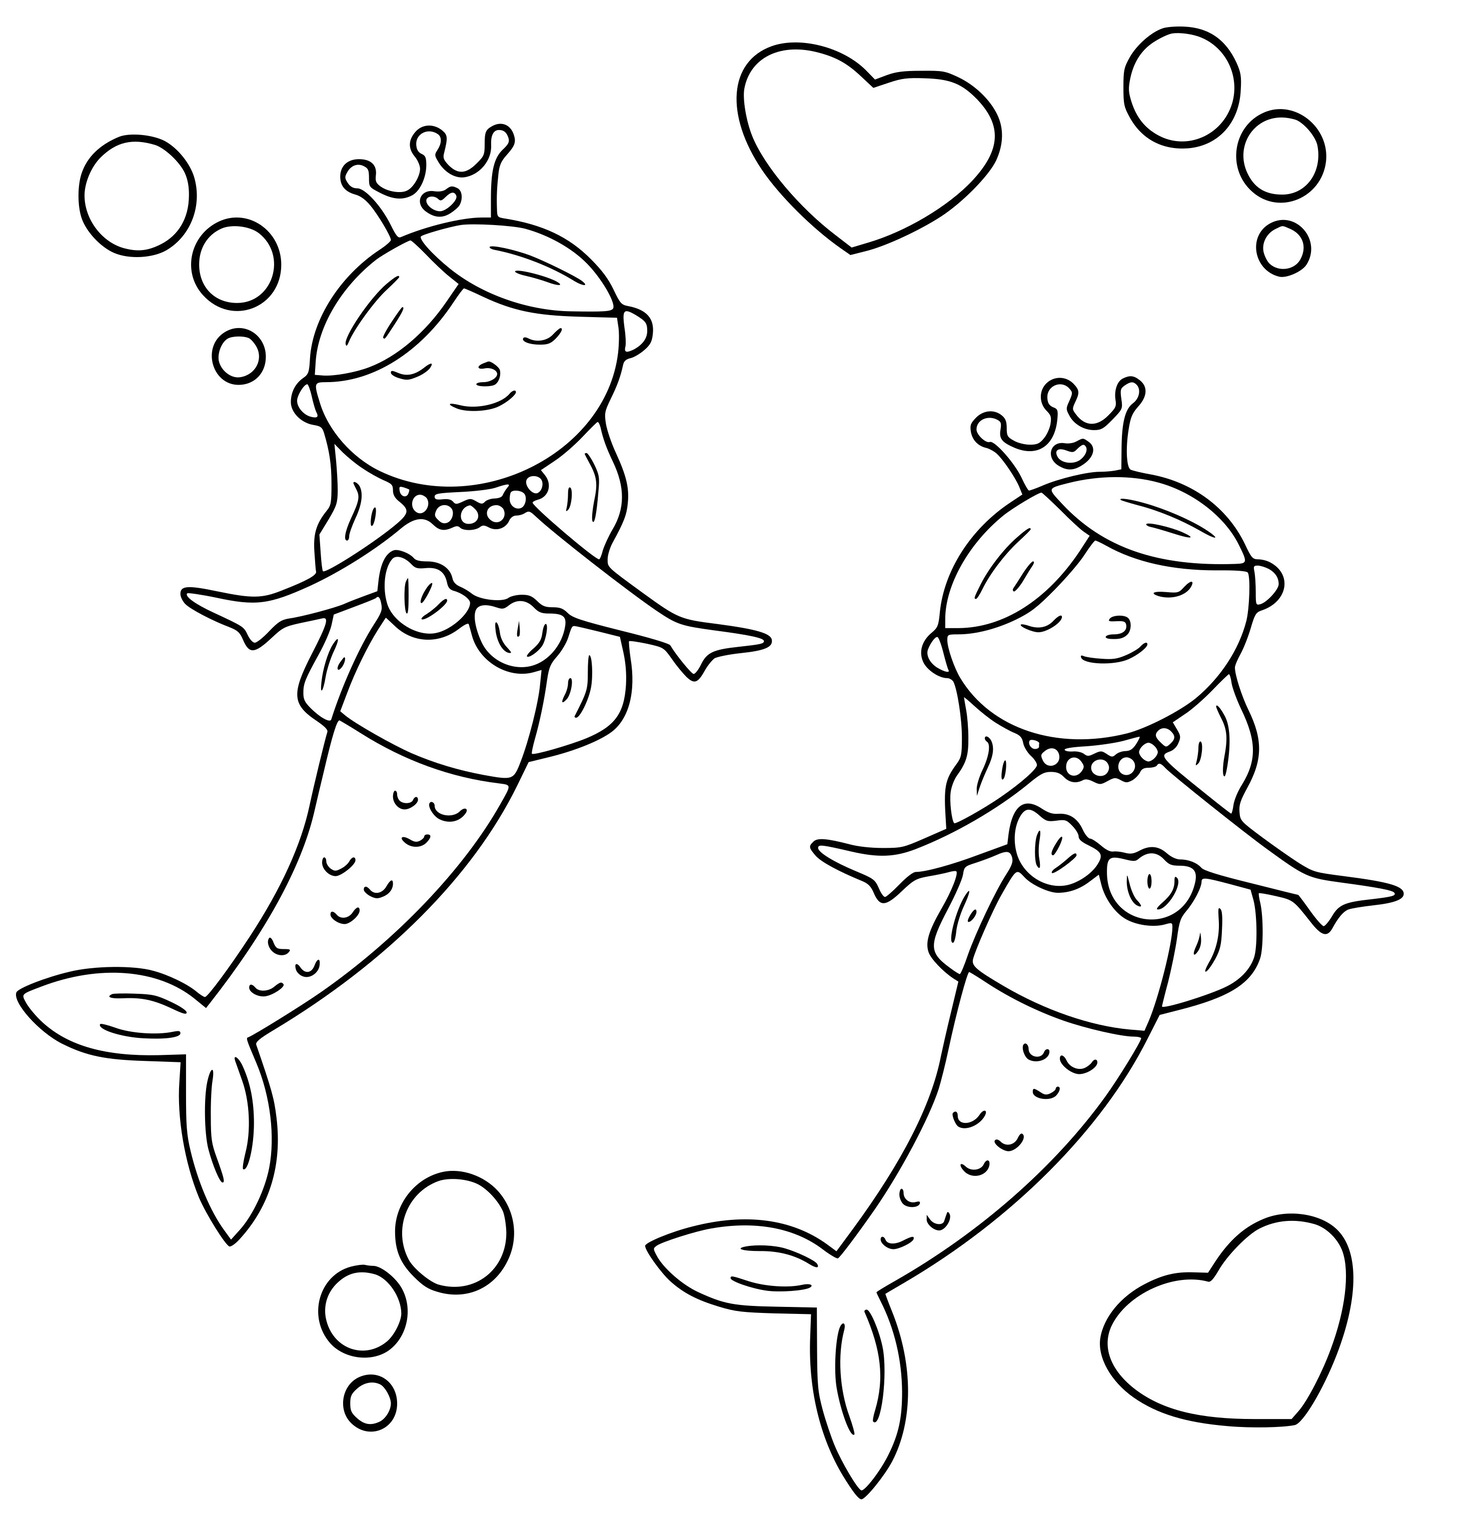 Matching Mermaids With Hearts